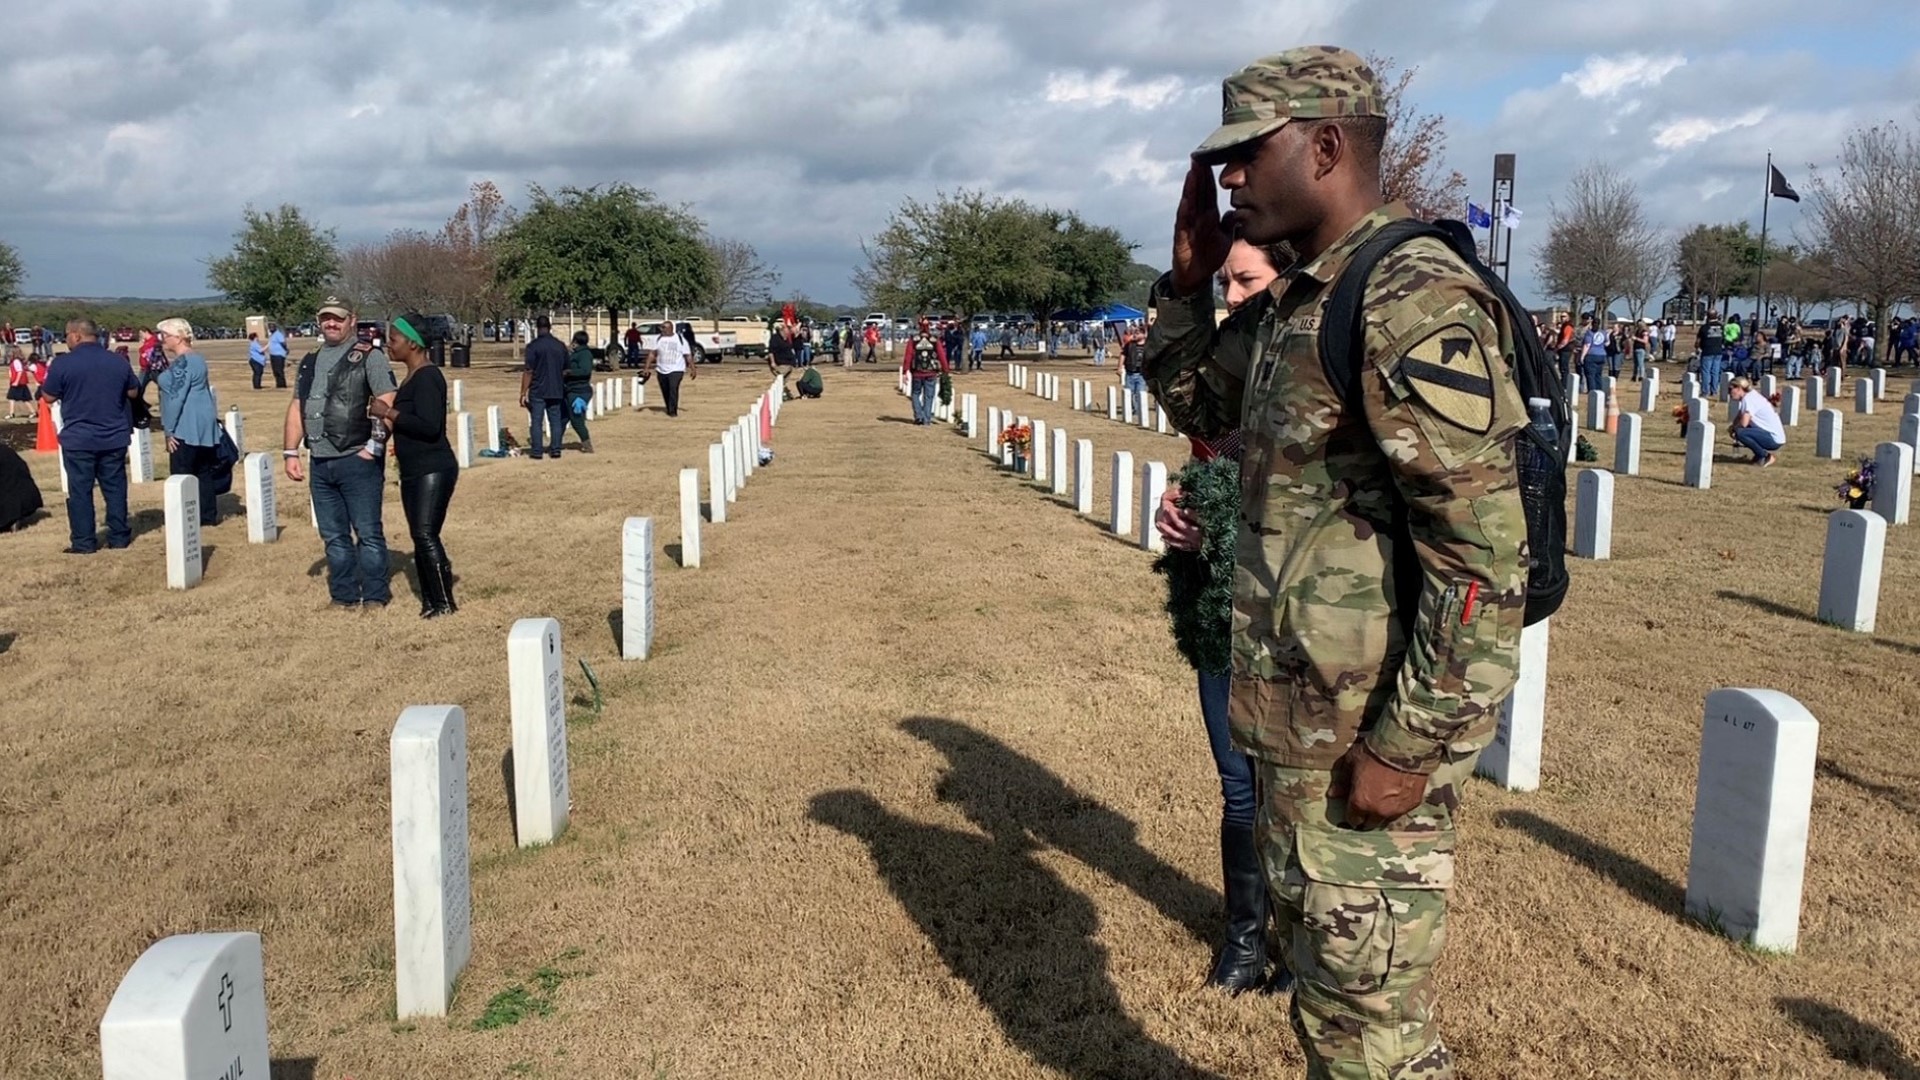 Thousands gathered at the Central Texas Veterans Cemetery to lay wreaths on veterans' headstones.